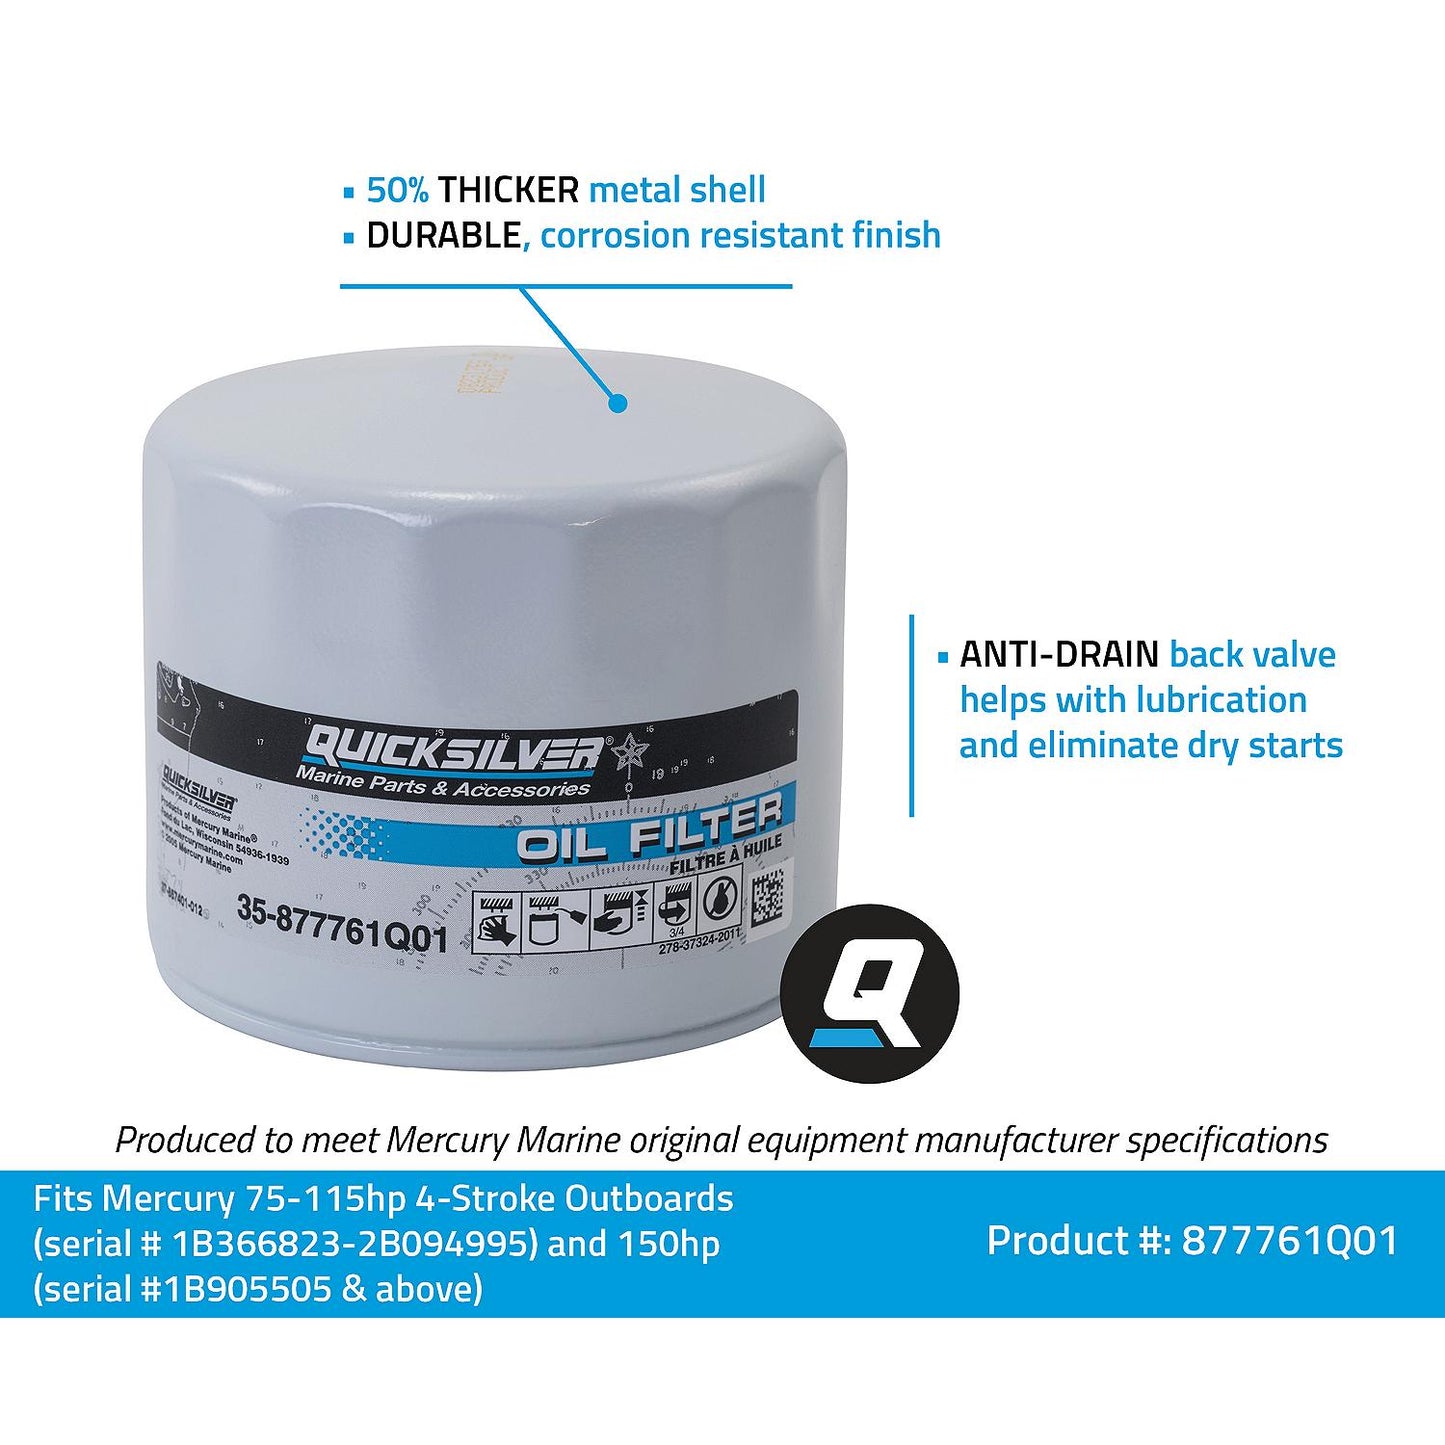 Quicksilver 877761Q01 Oil Filter for Select Mercury and Mariner 75-115 Hp Outboards and 150 Hp EFI 4-Stroke Outboards